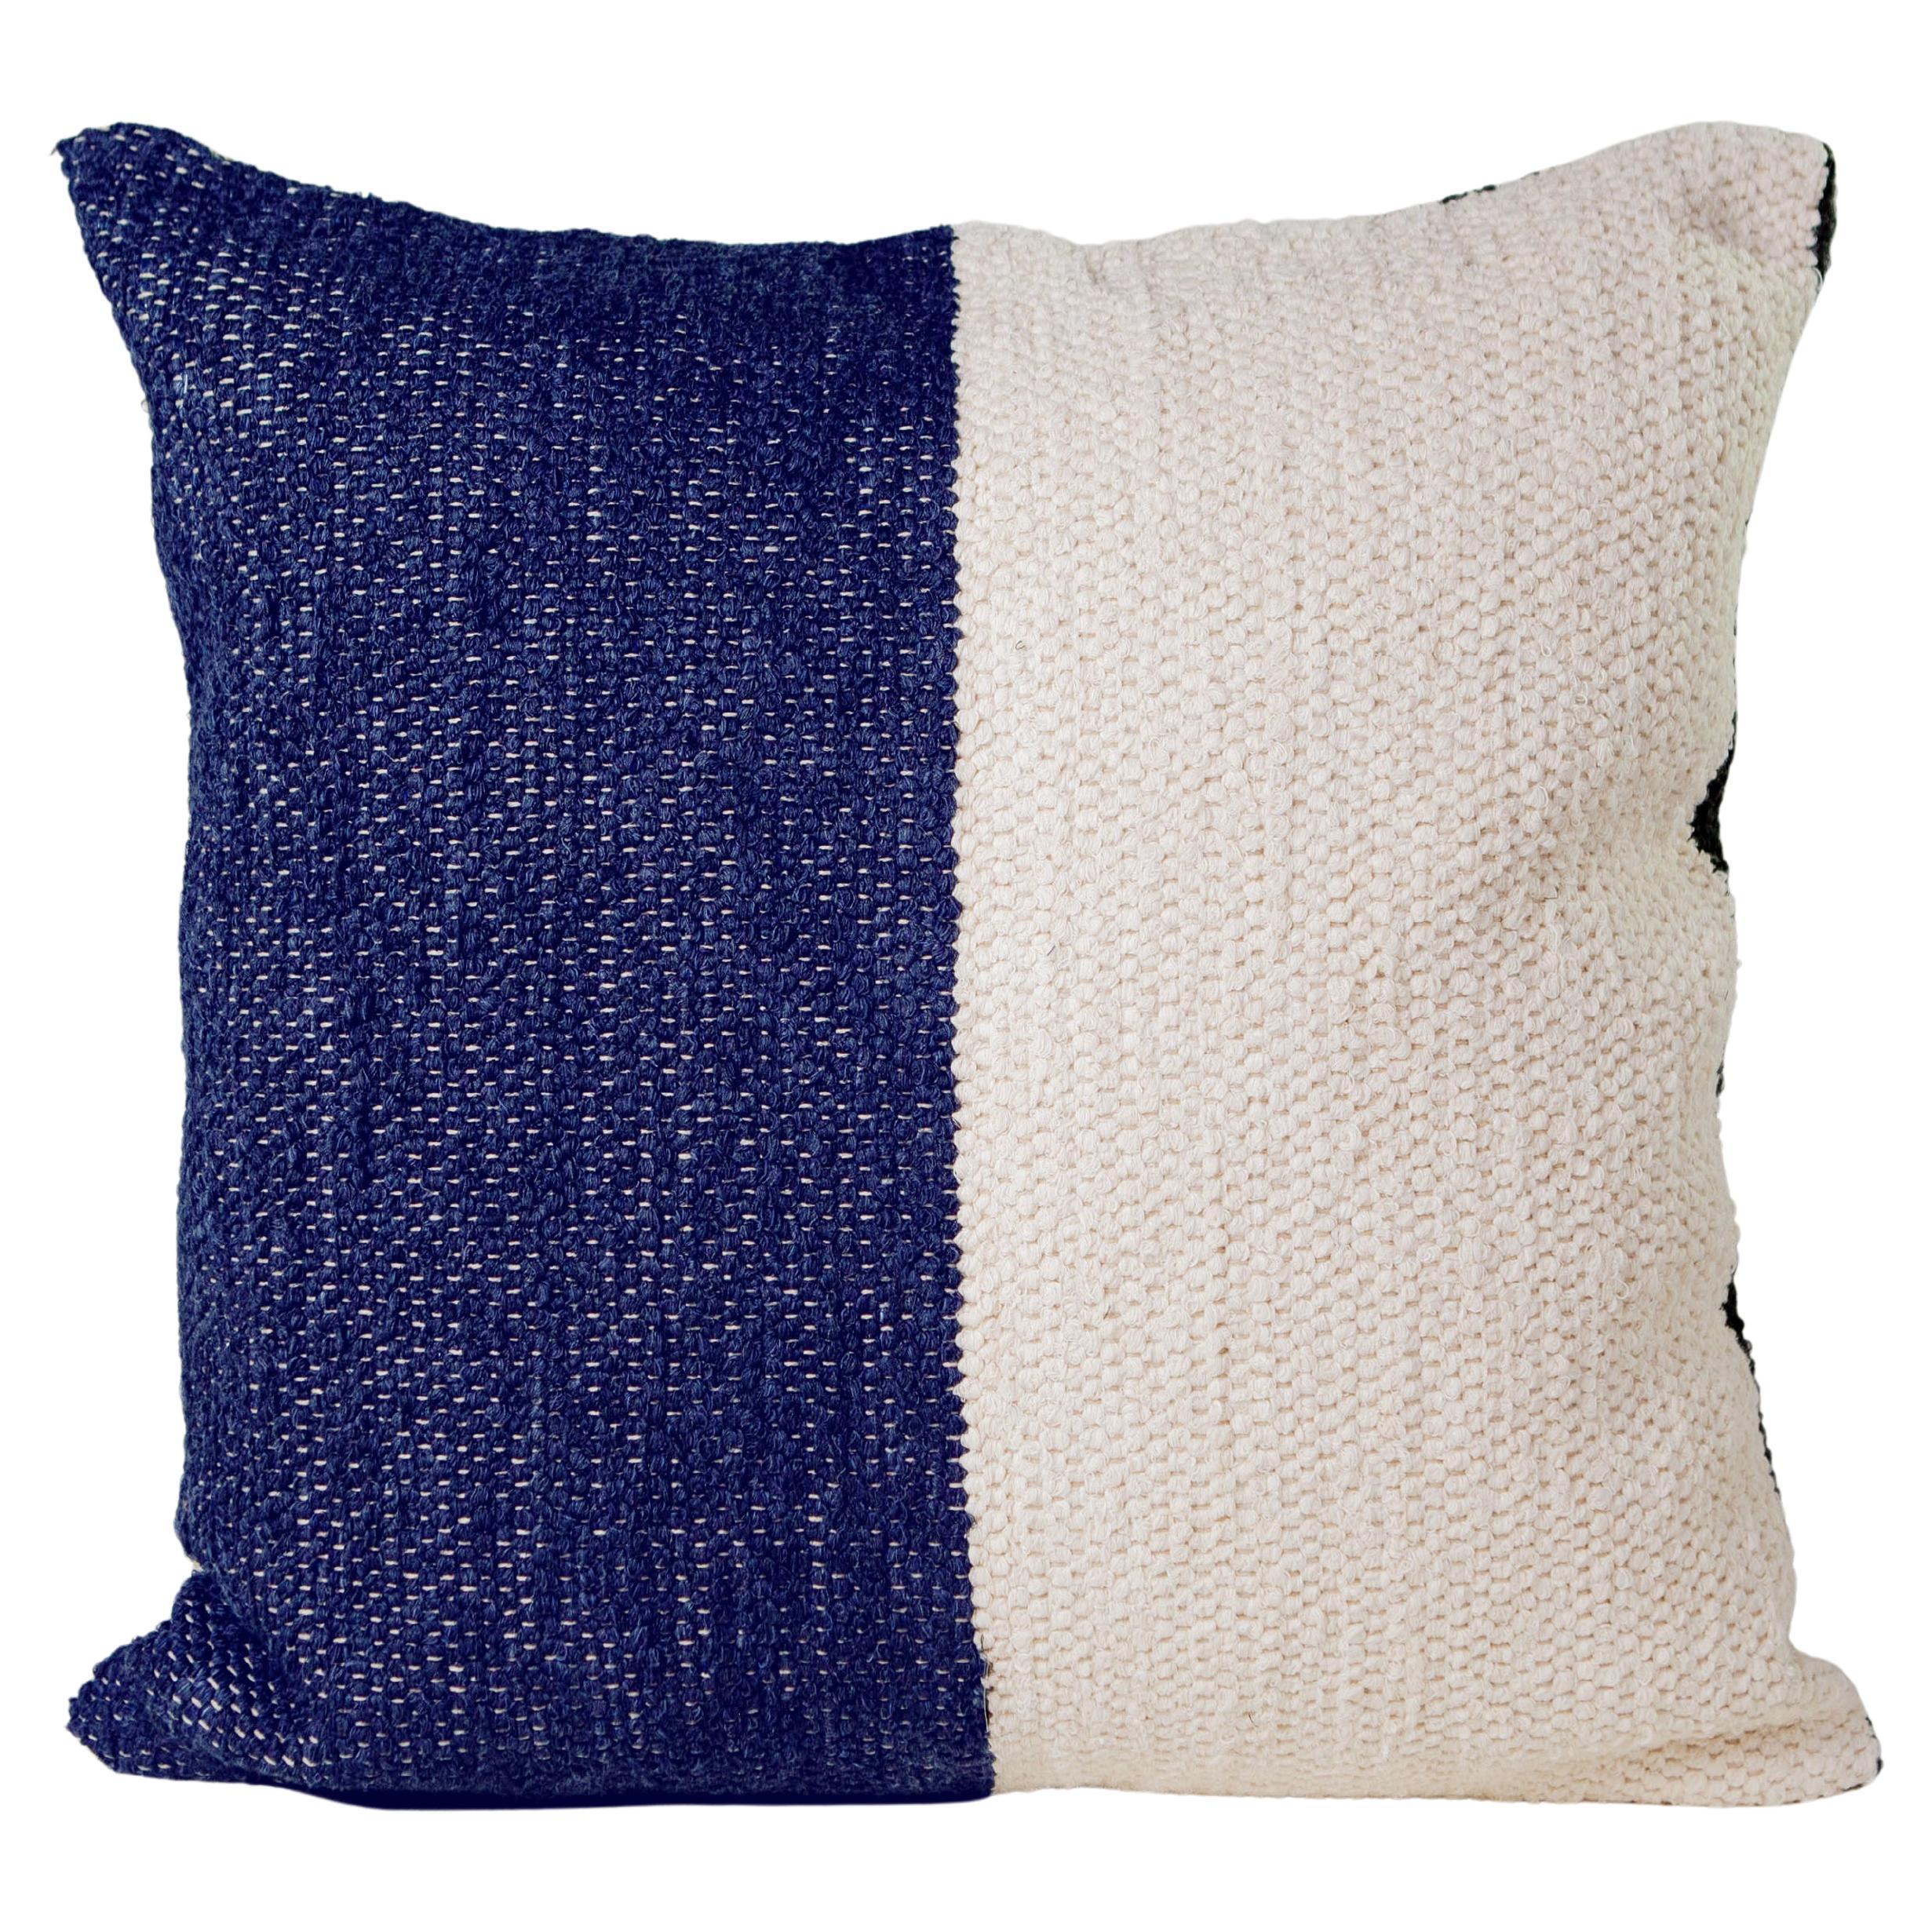 Casa Cubista Handwoven Cotton Navy and White Color Block Throw Pillow, in Stock